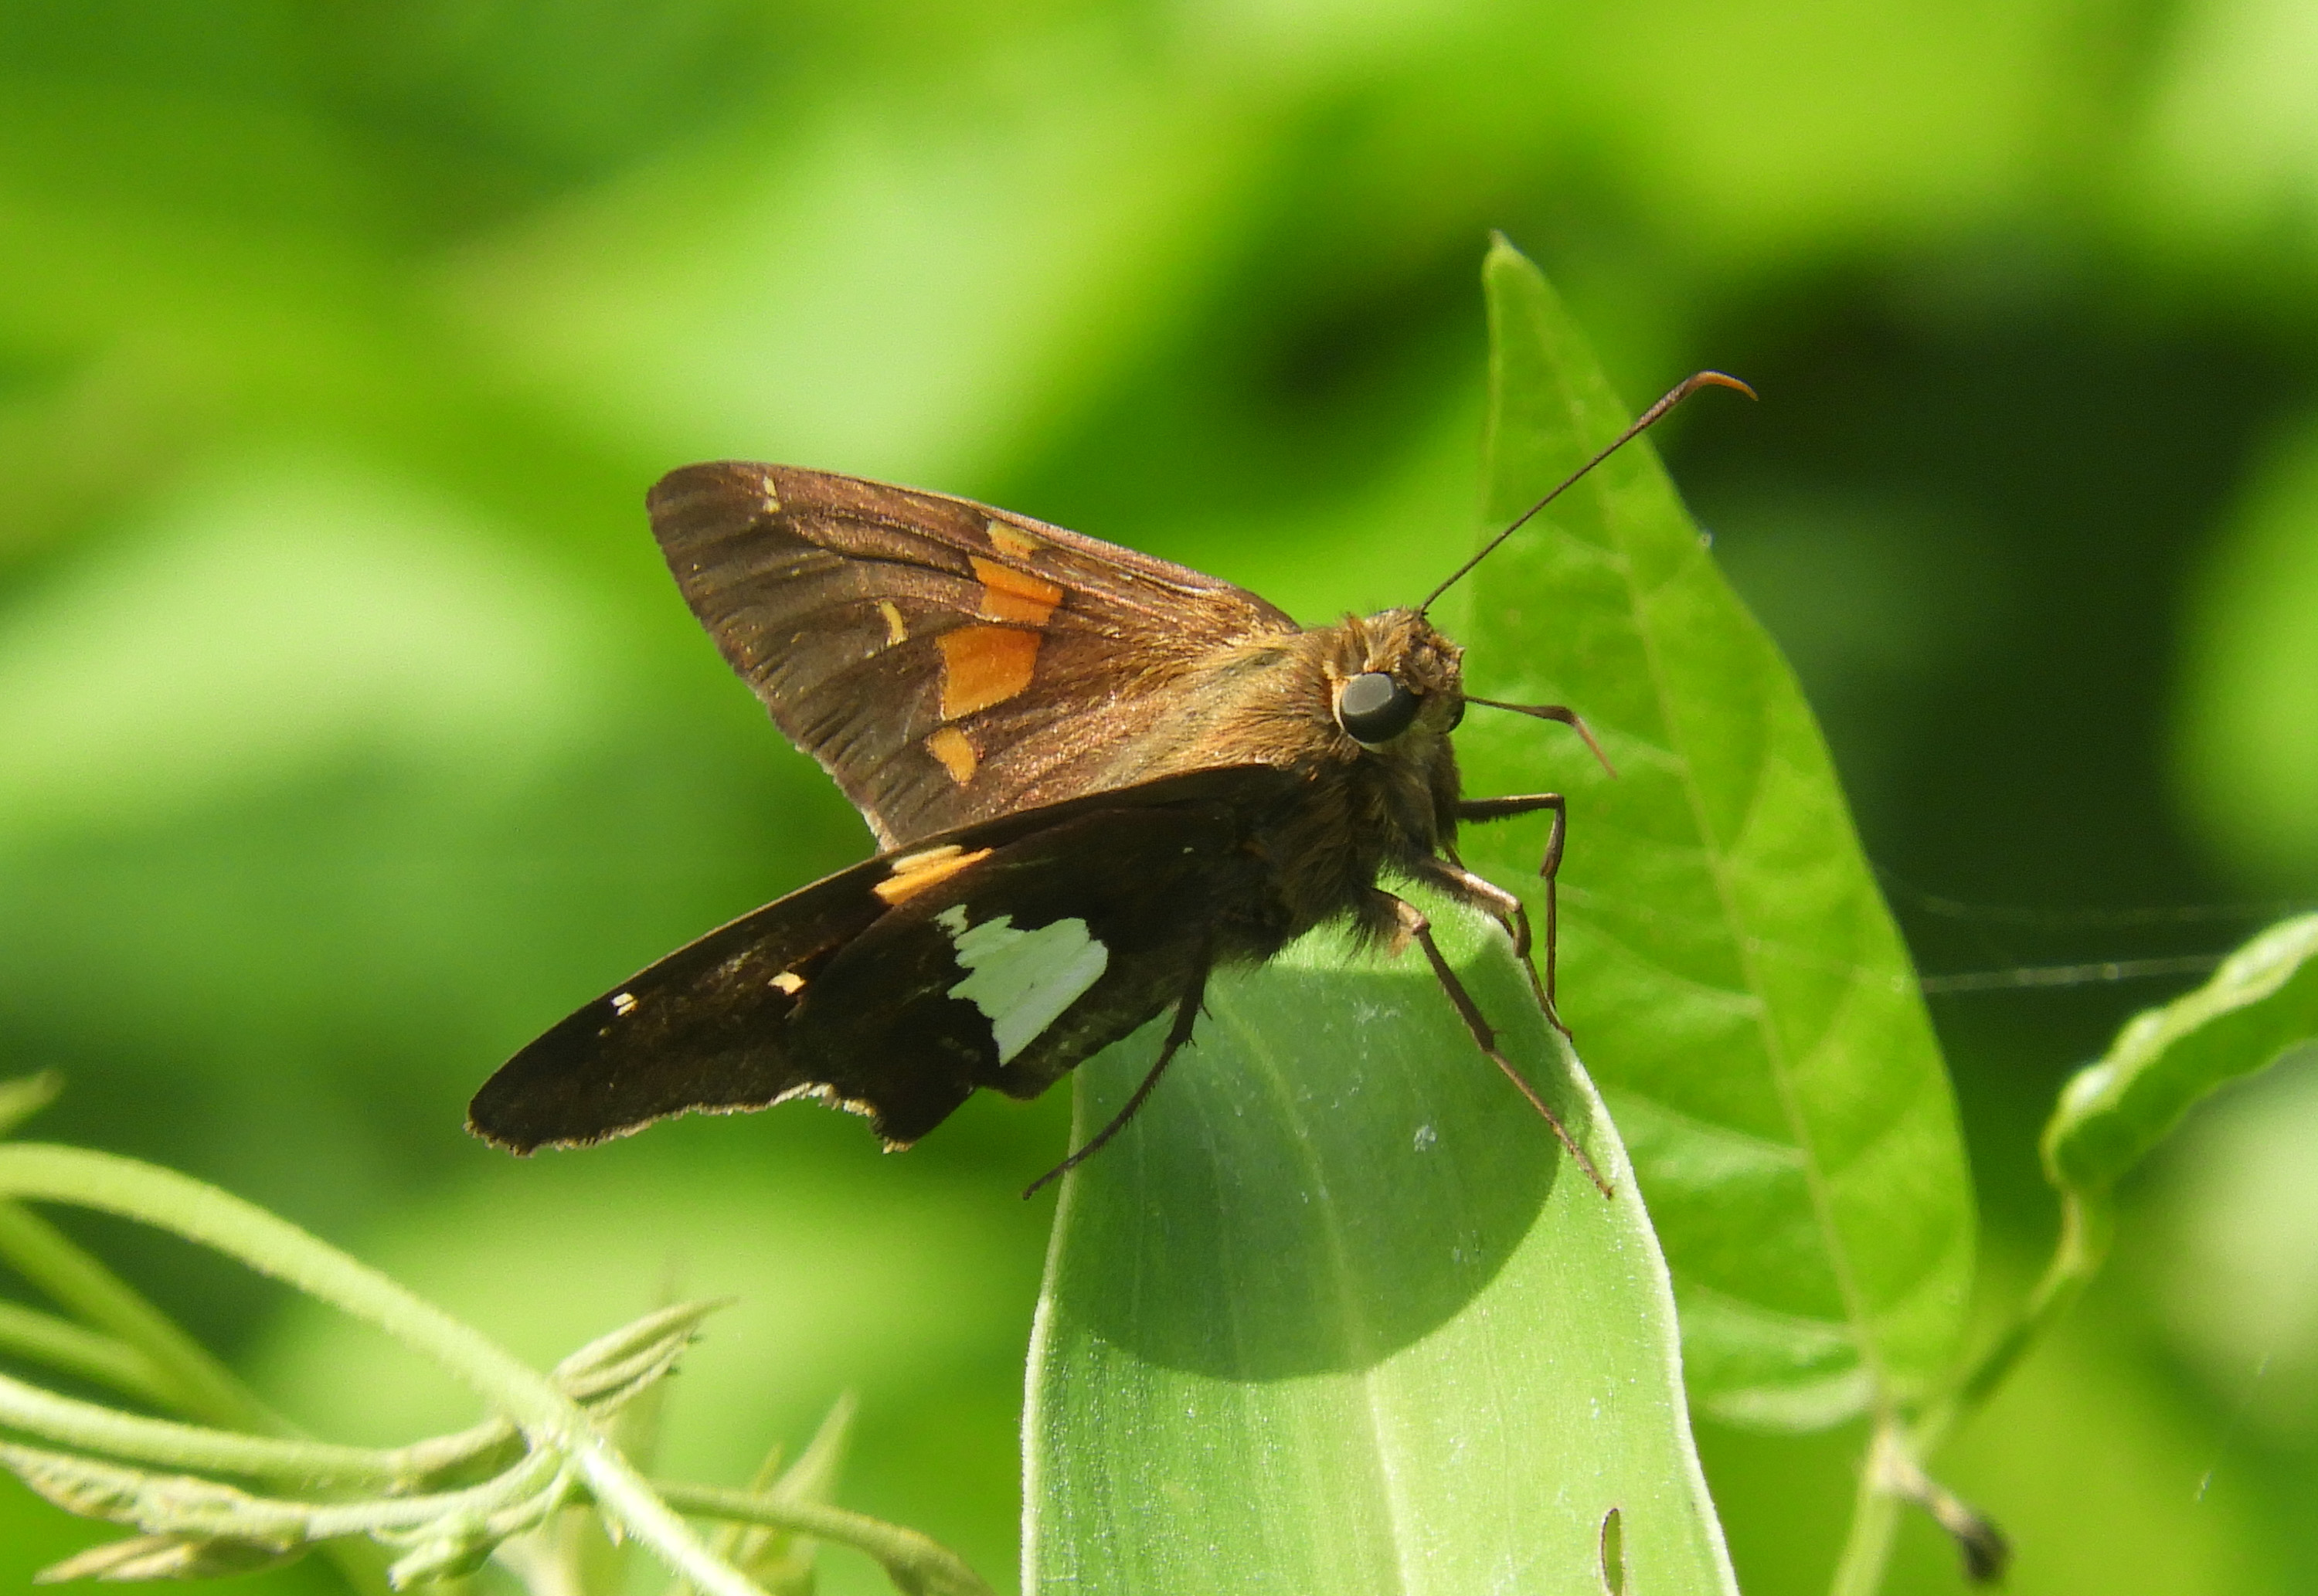 BW silver spotted skipper